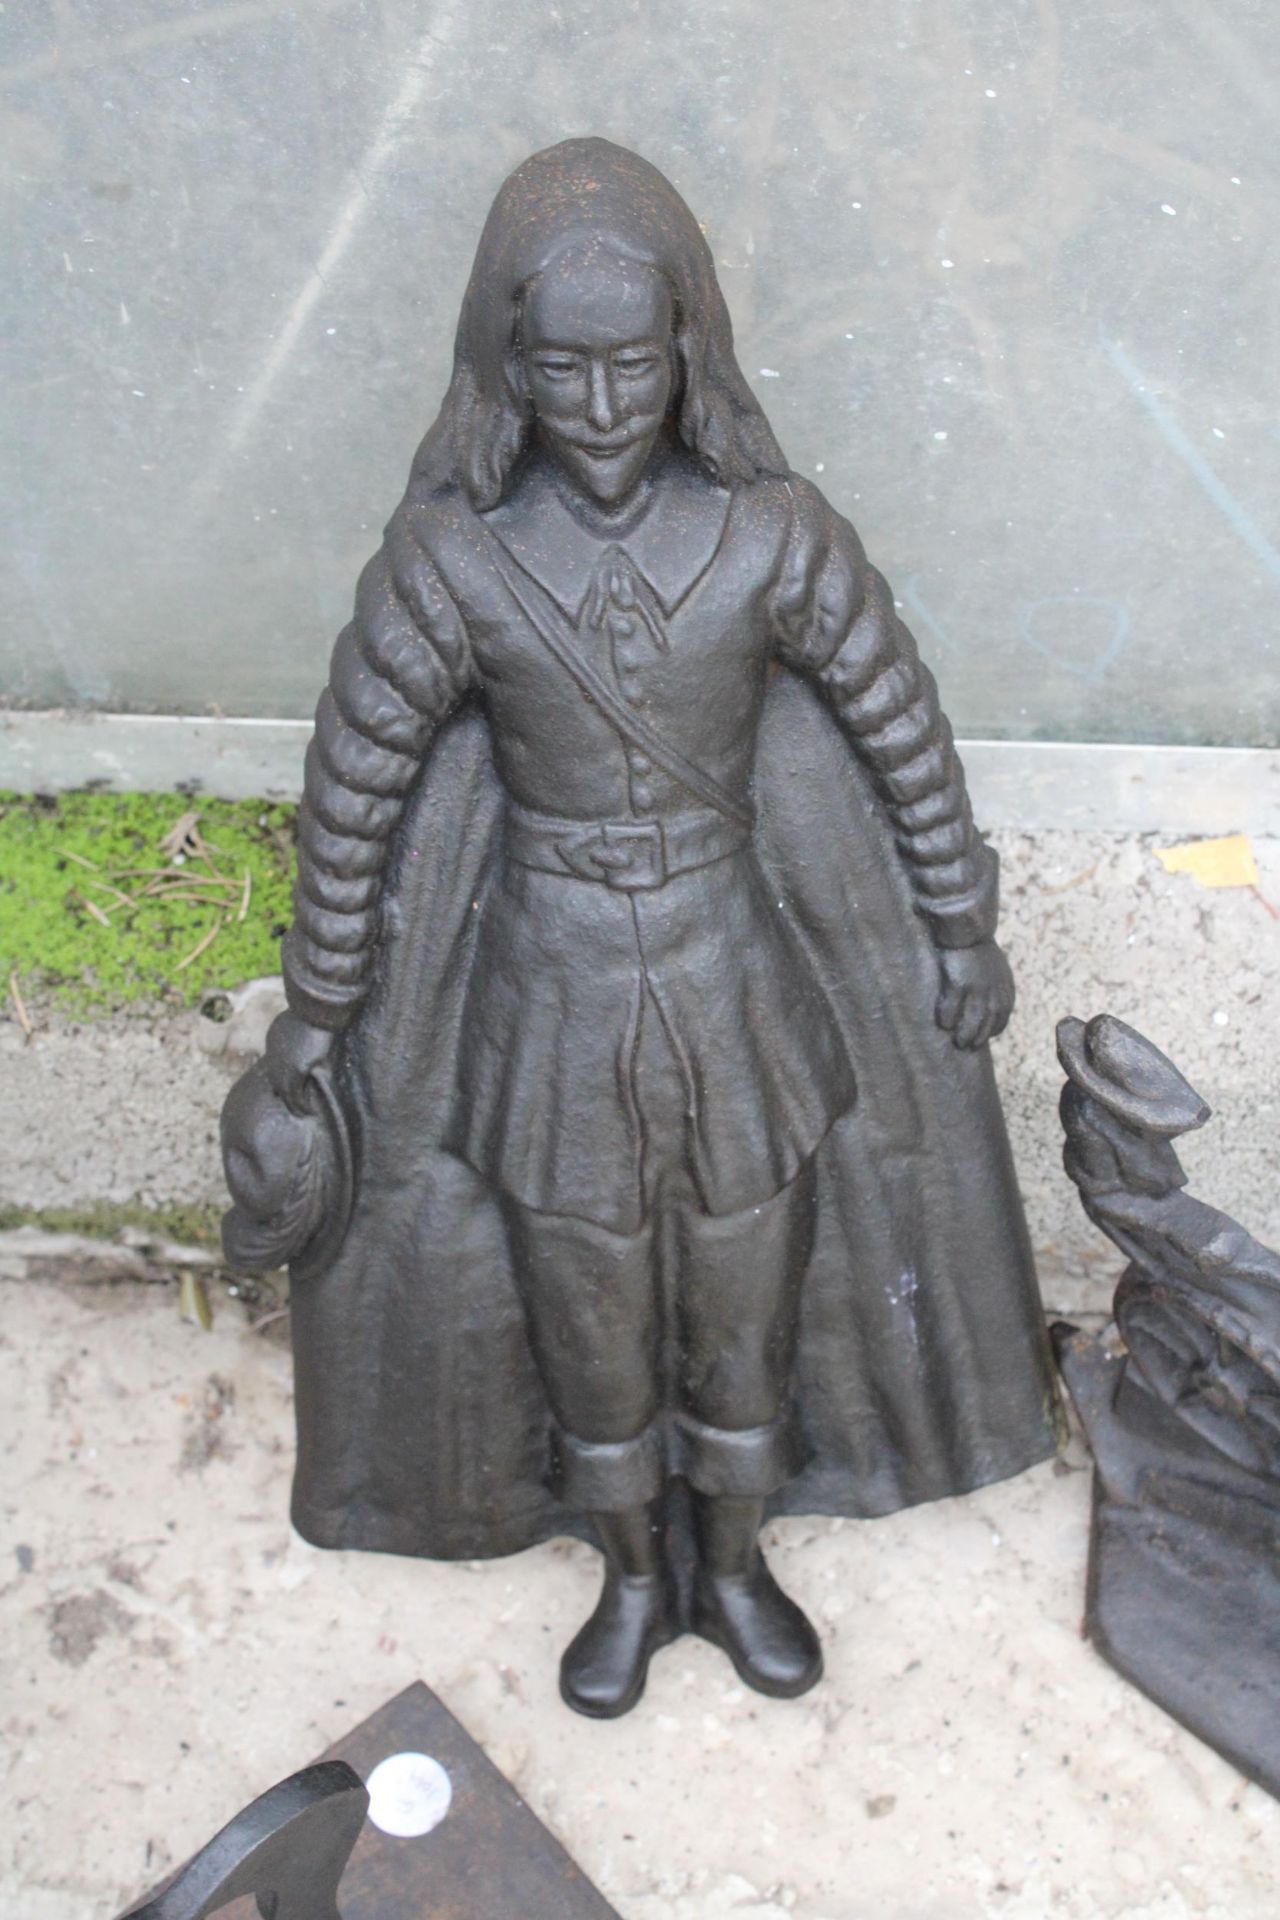 TWO CAST IRON HORSE DOOR STOPS AND A CAST IRON MALE FIGURE - Image 2 of 3